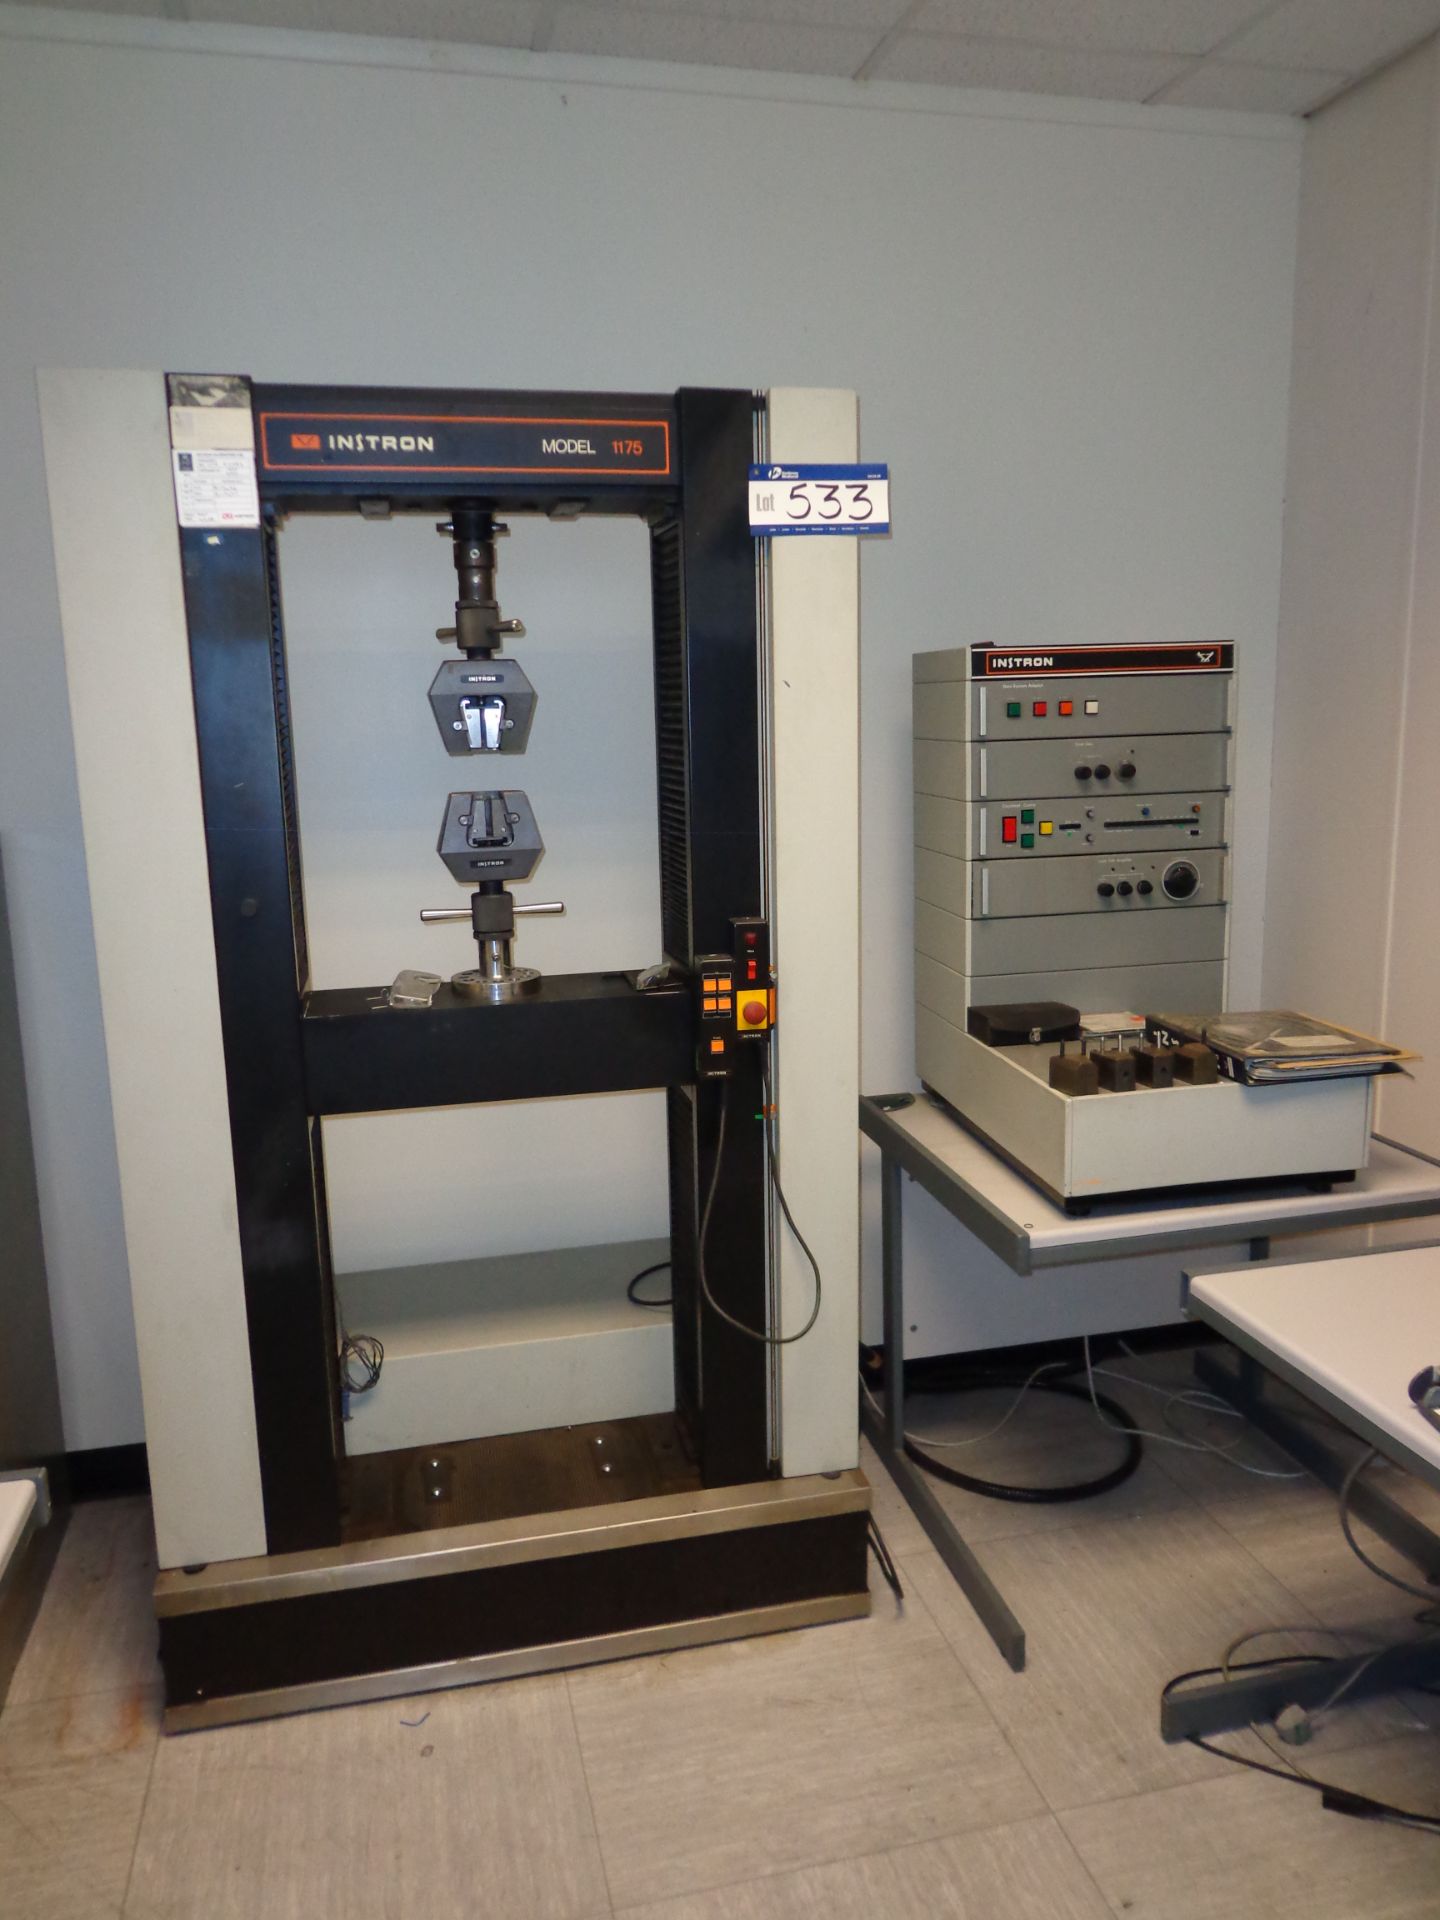 Instron Model 1175 Material Testing Machine c/w Electronic Control Console, serial number: H0583